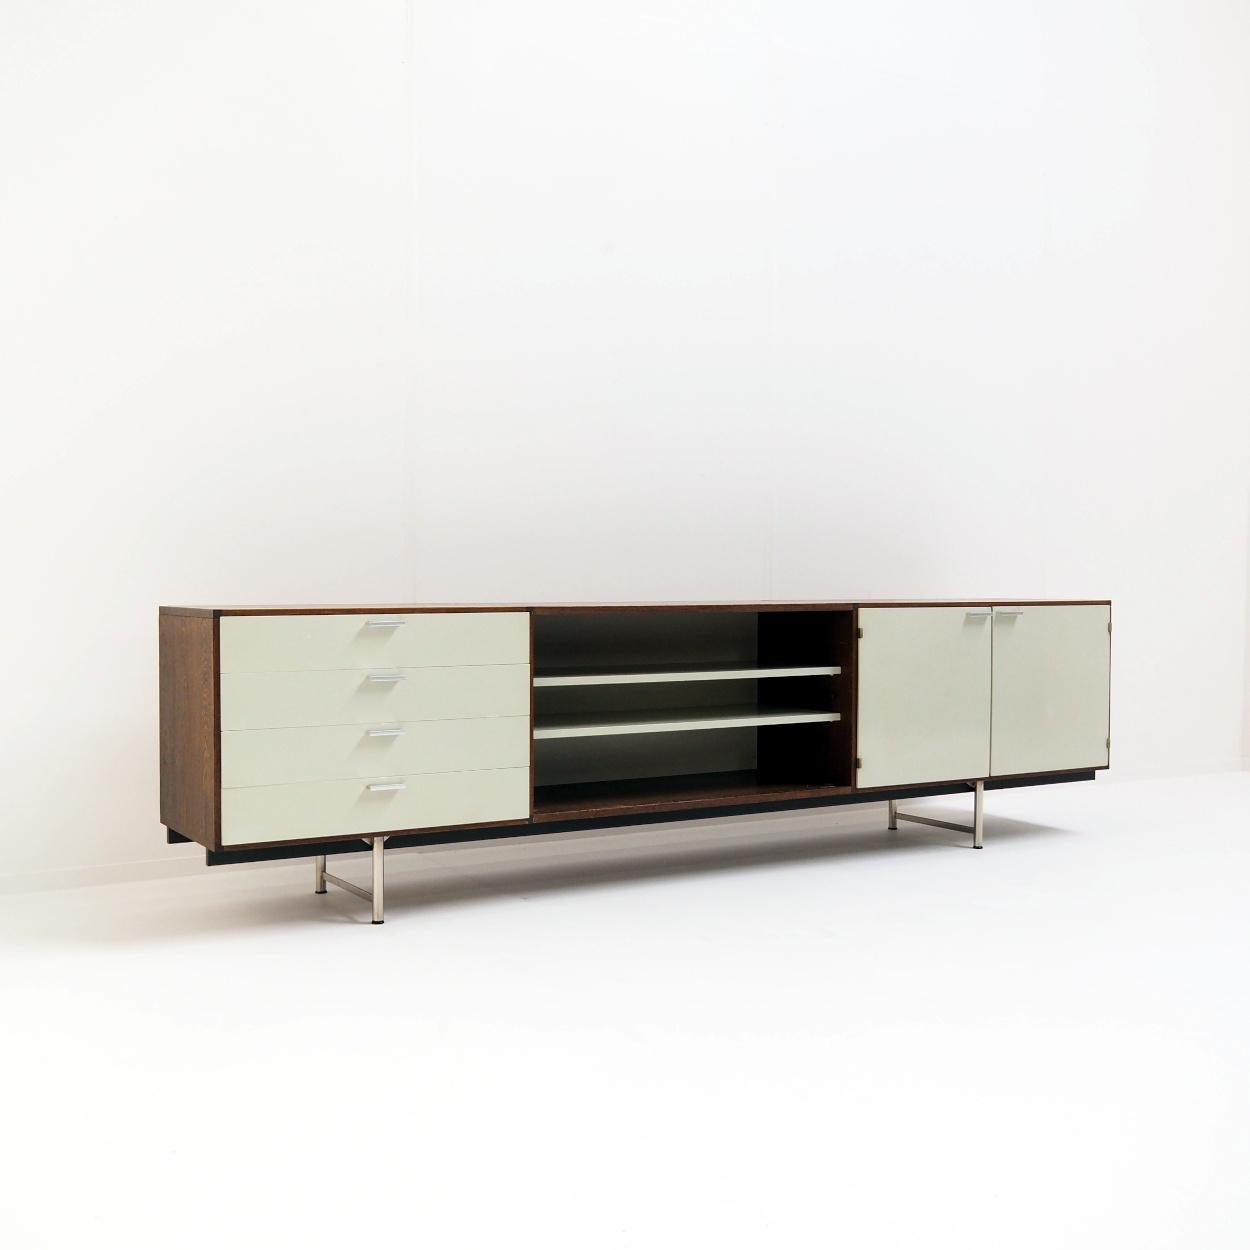 1950s/60s sideboard in wenge wood and white paint designed by Cees Braakman for Pastoe, the Netherlands. It is from the 'Made to Measure' series which was produced from the early 1950s to the mid-1960s.

The sideboard consists of one open